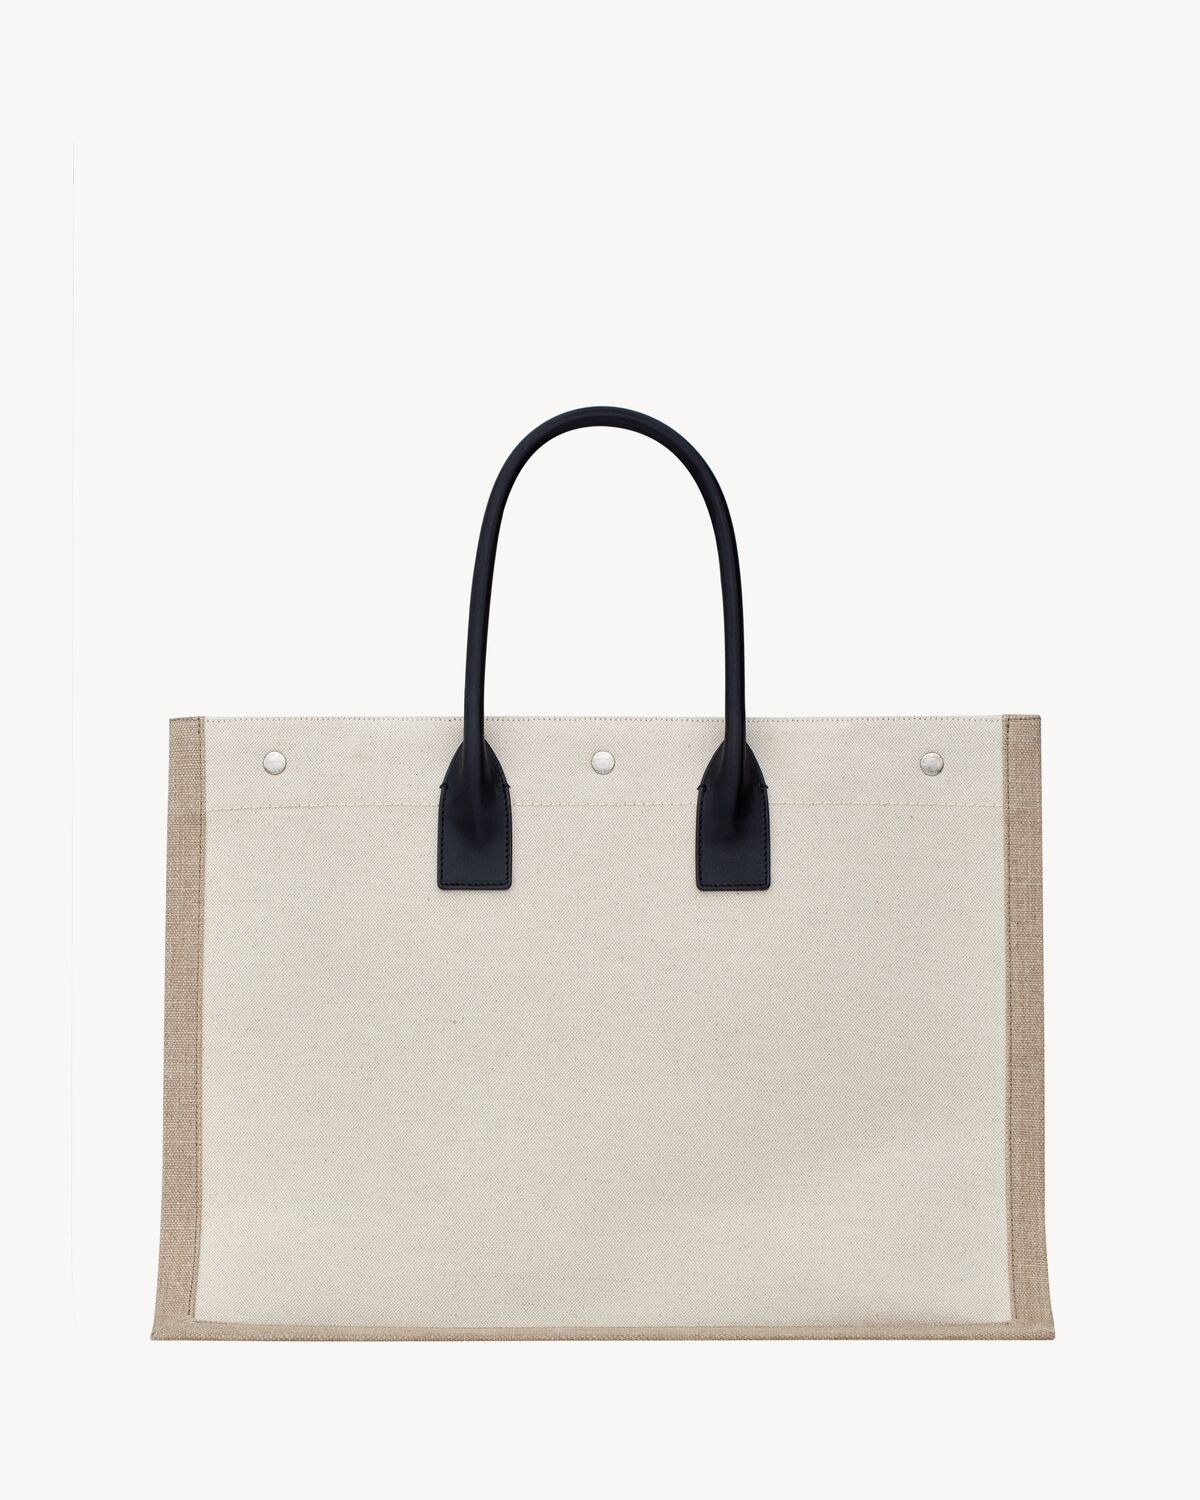 RIVE GAUCHE large tote bag in printed canvas and leather